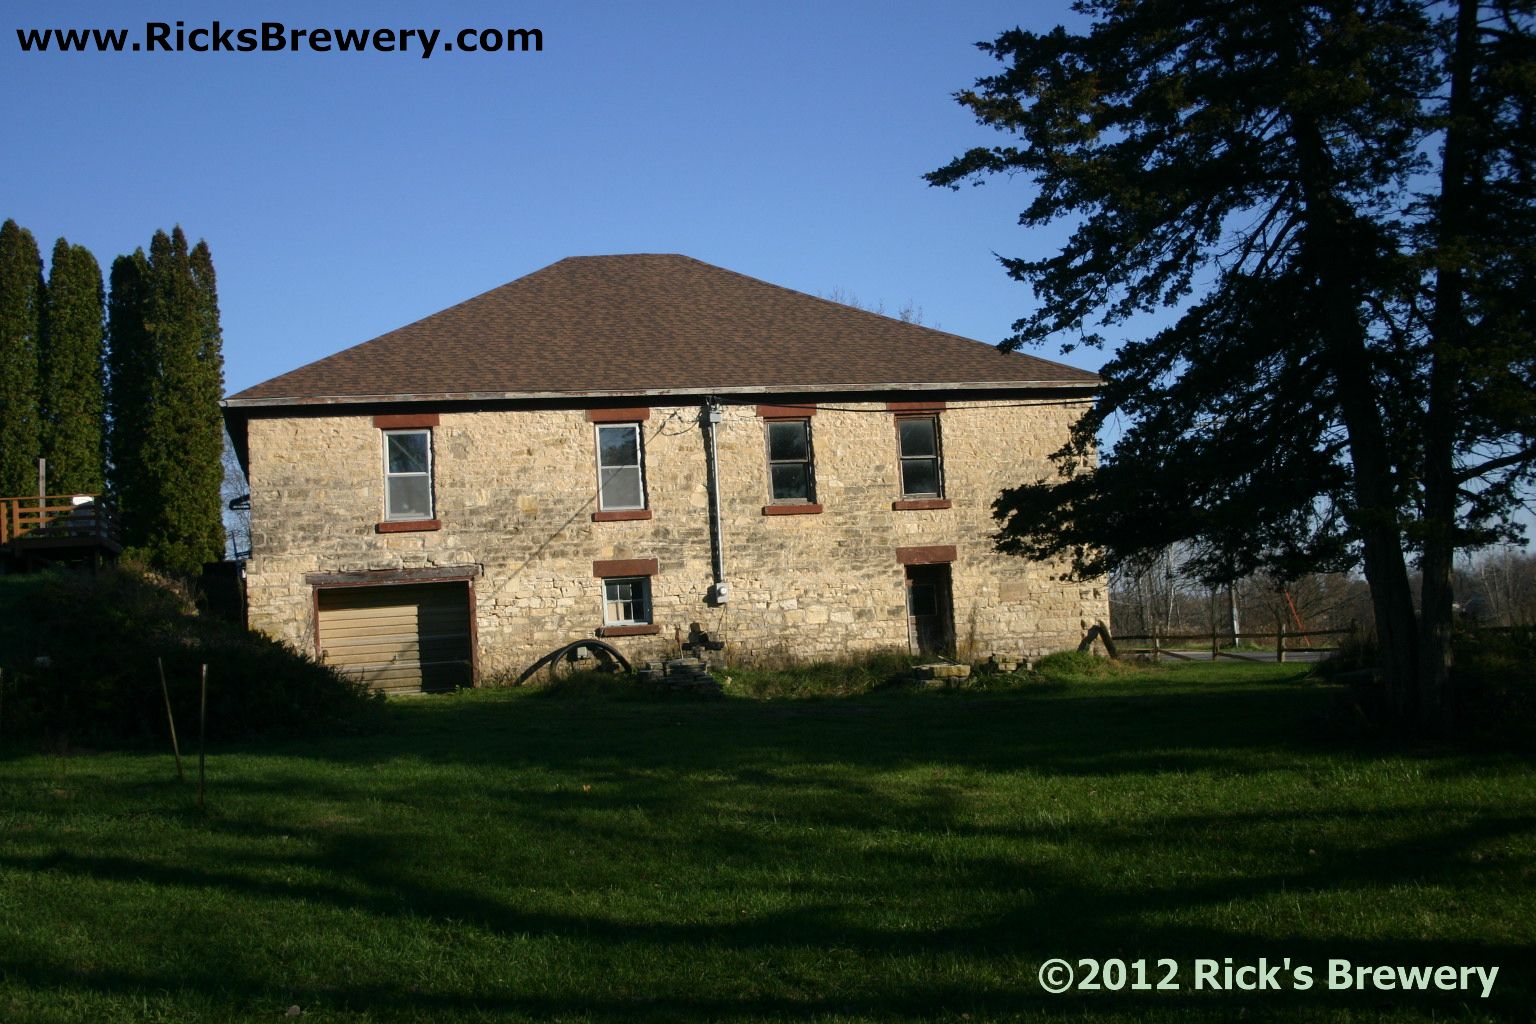 Rick's Brewery west view from creek